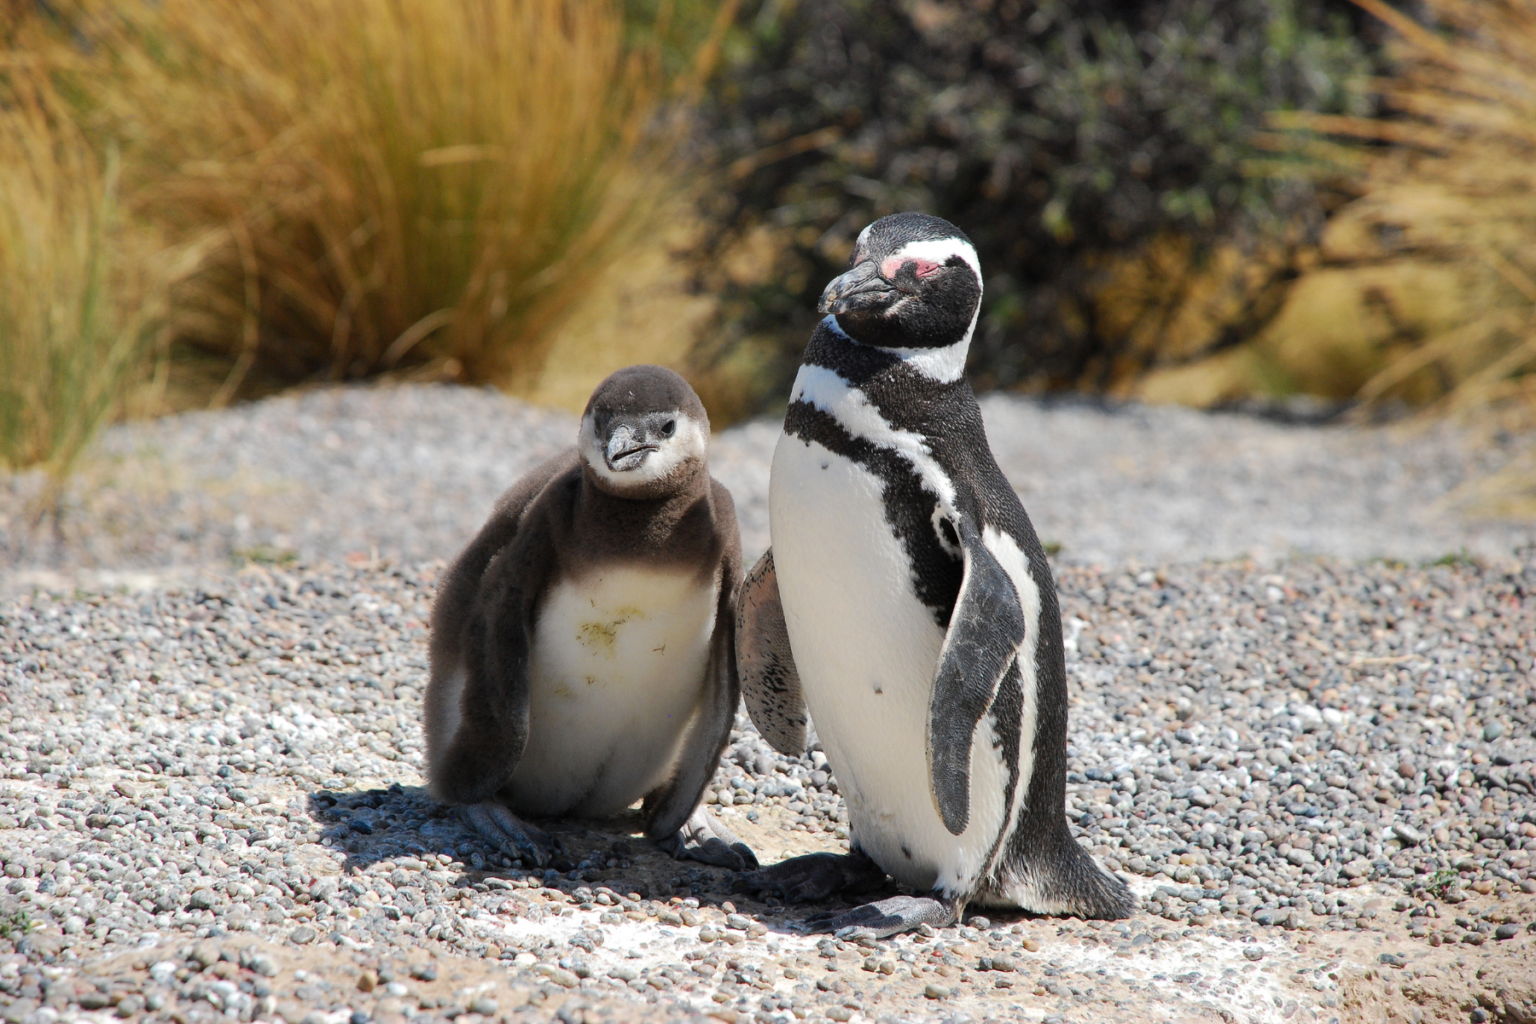 Two penguins standing on rocks